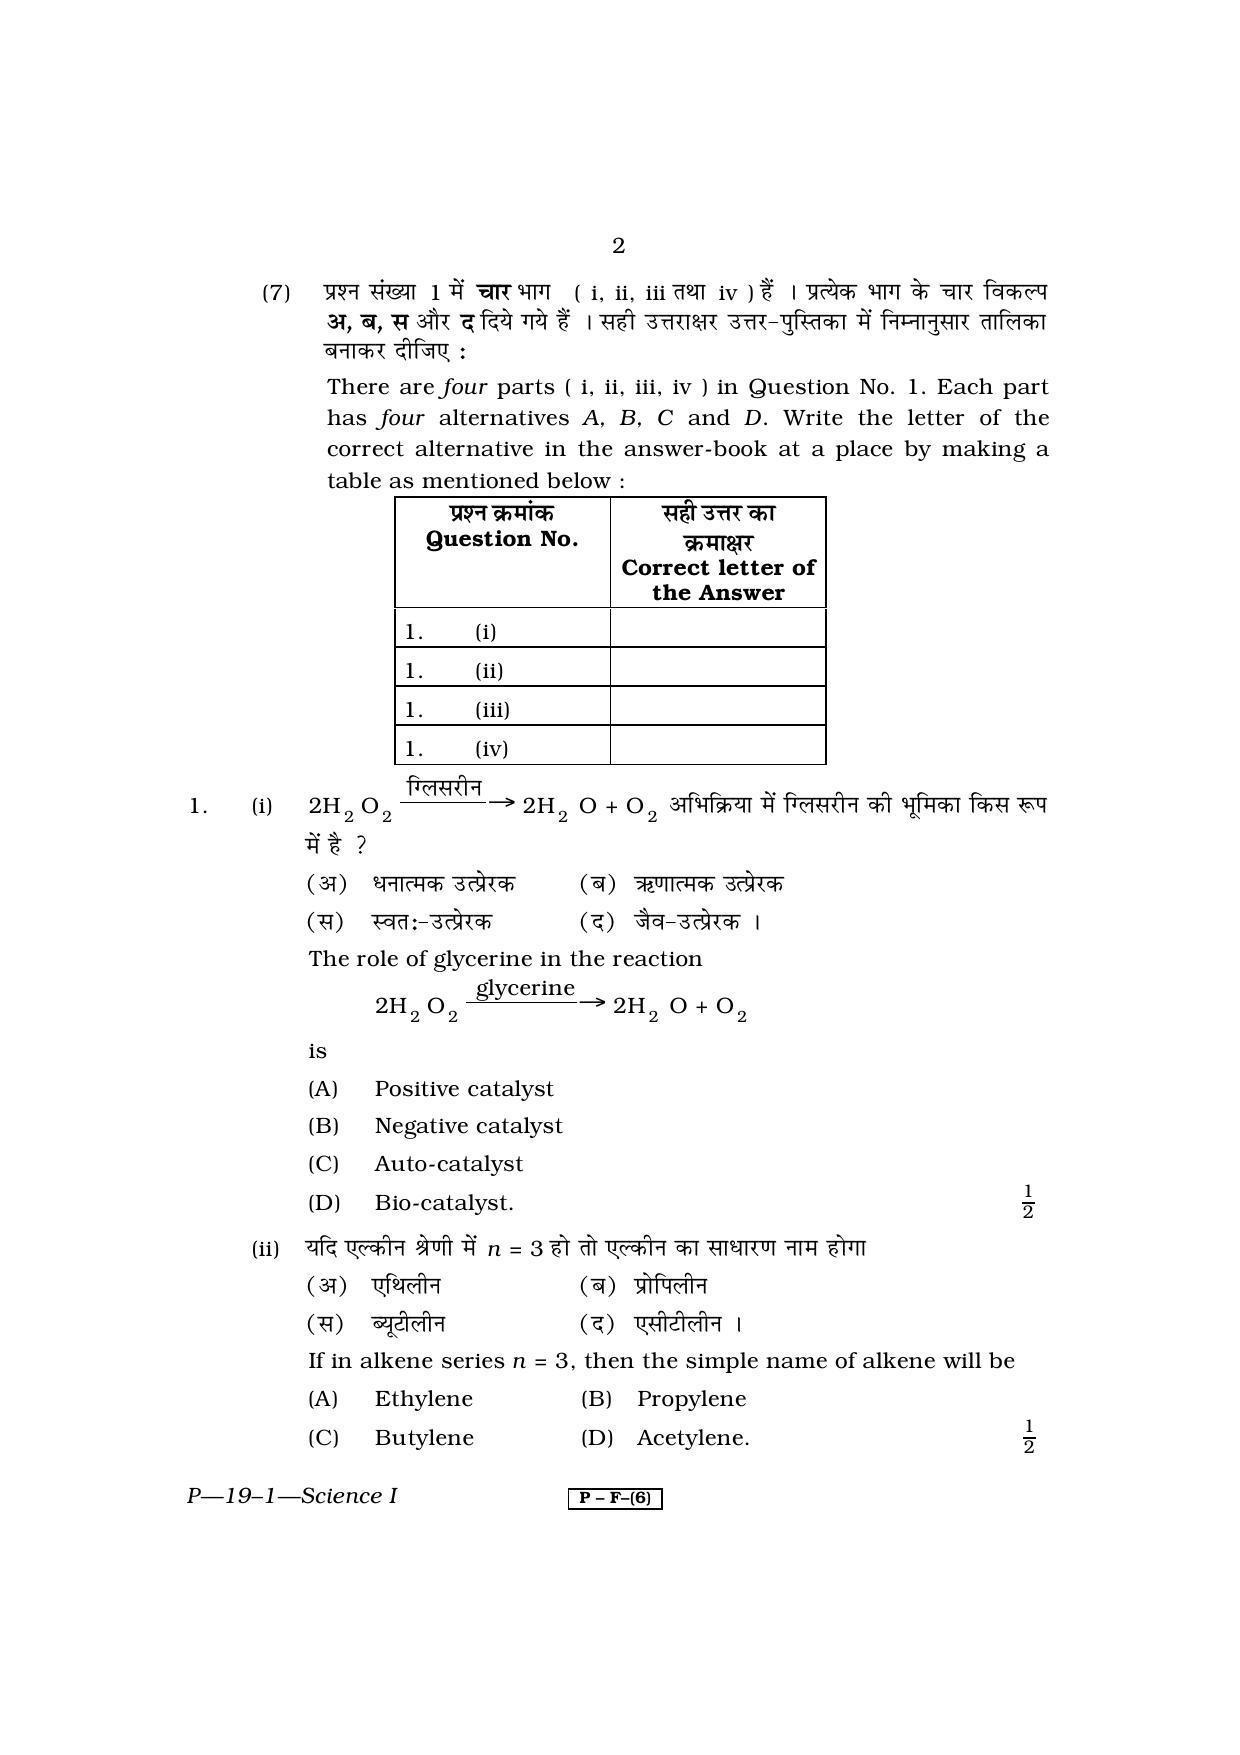 RBSE 2011 Science Praveshika Question Paper - Page 2